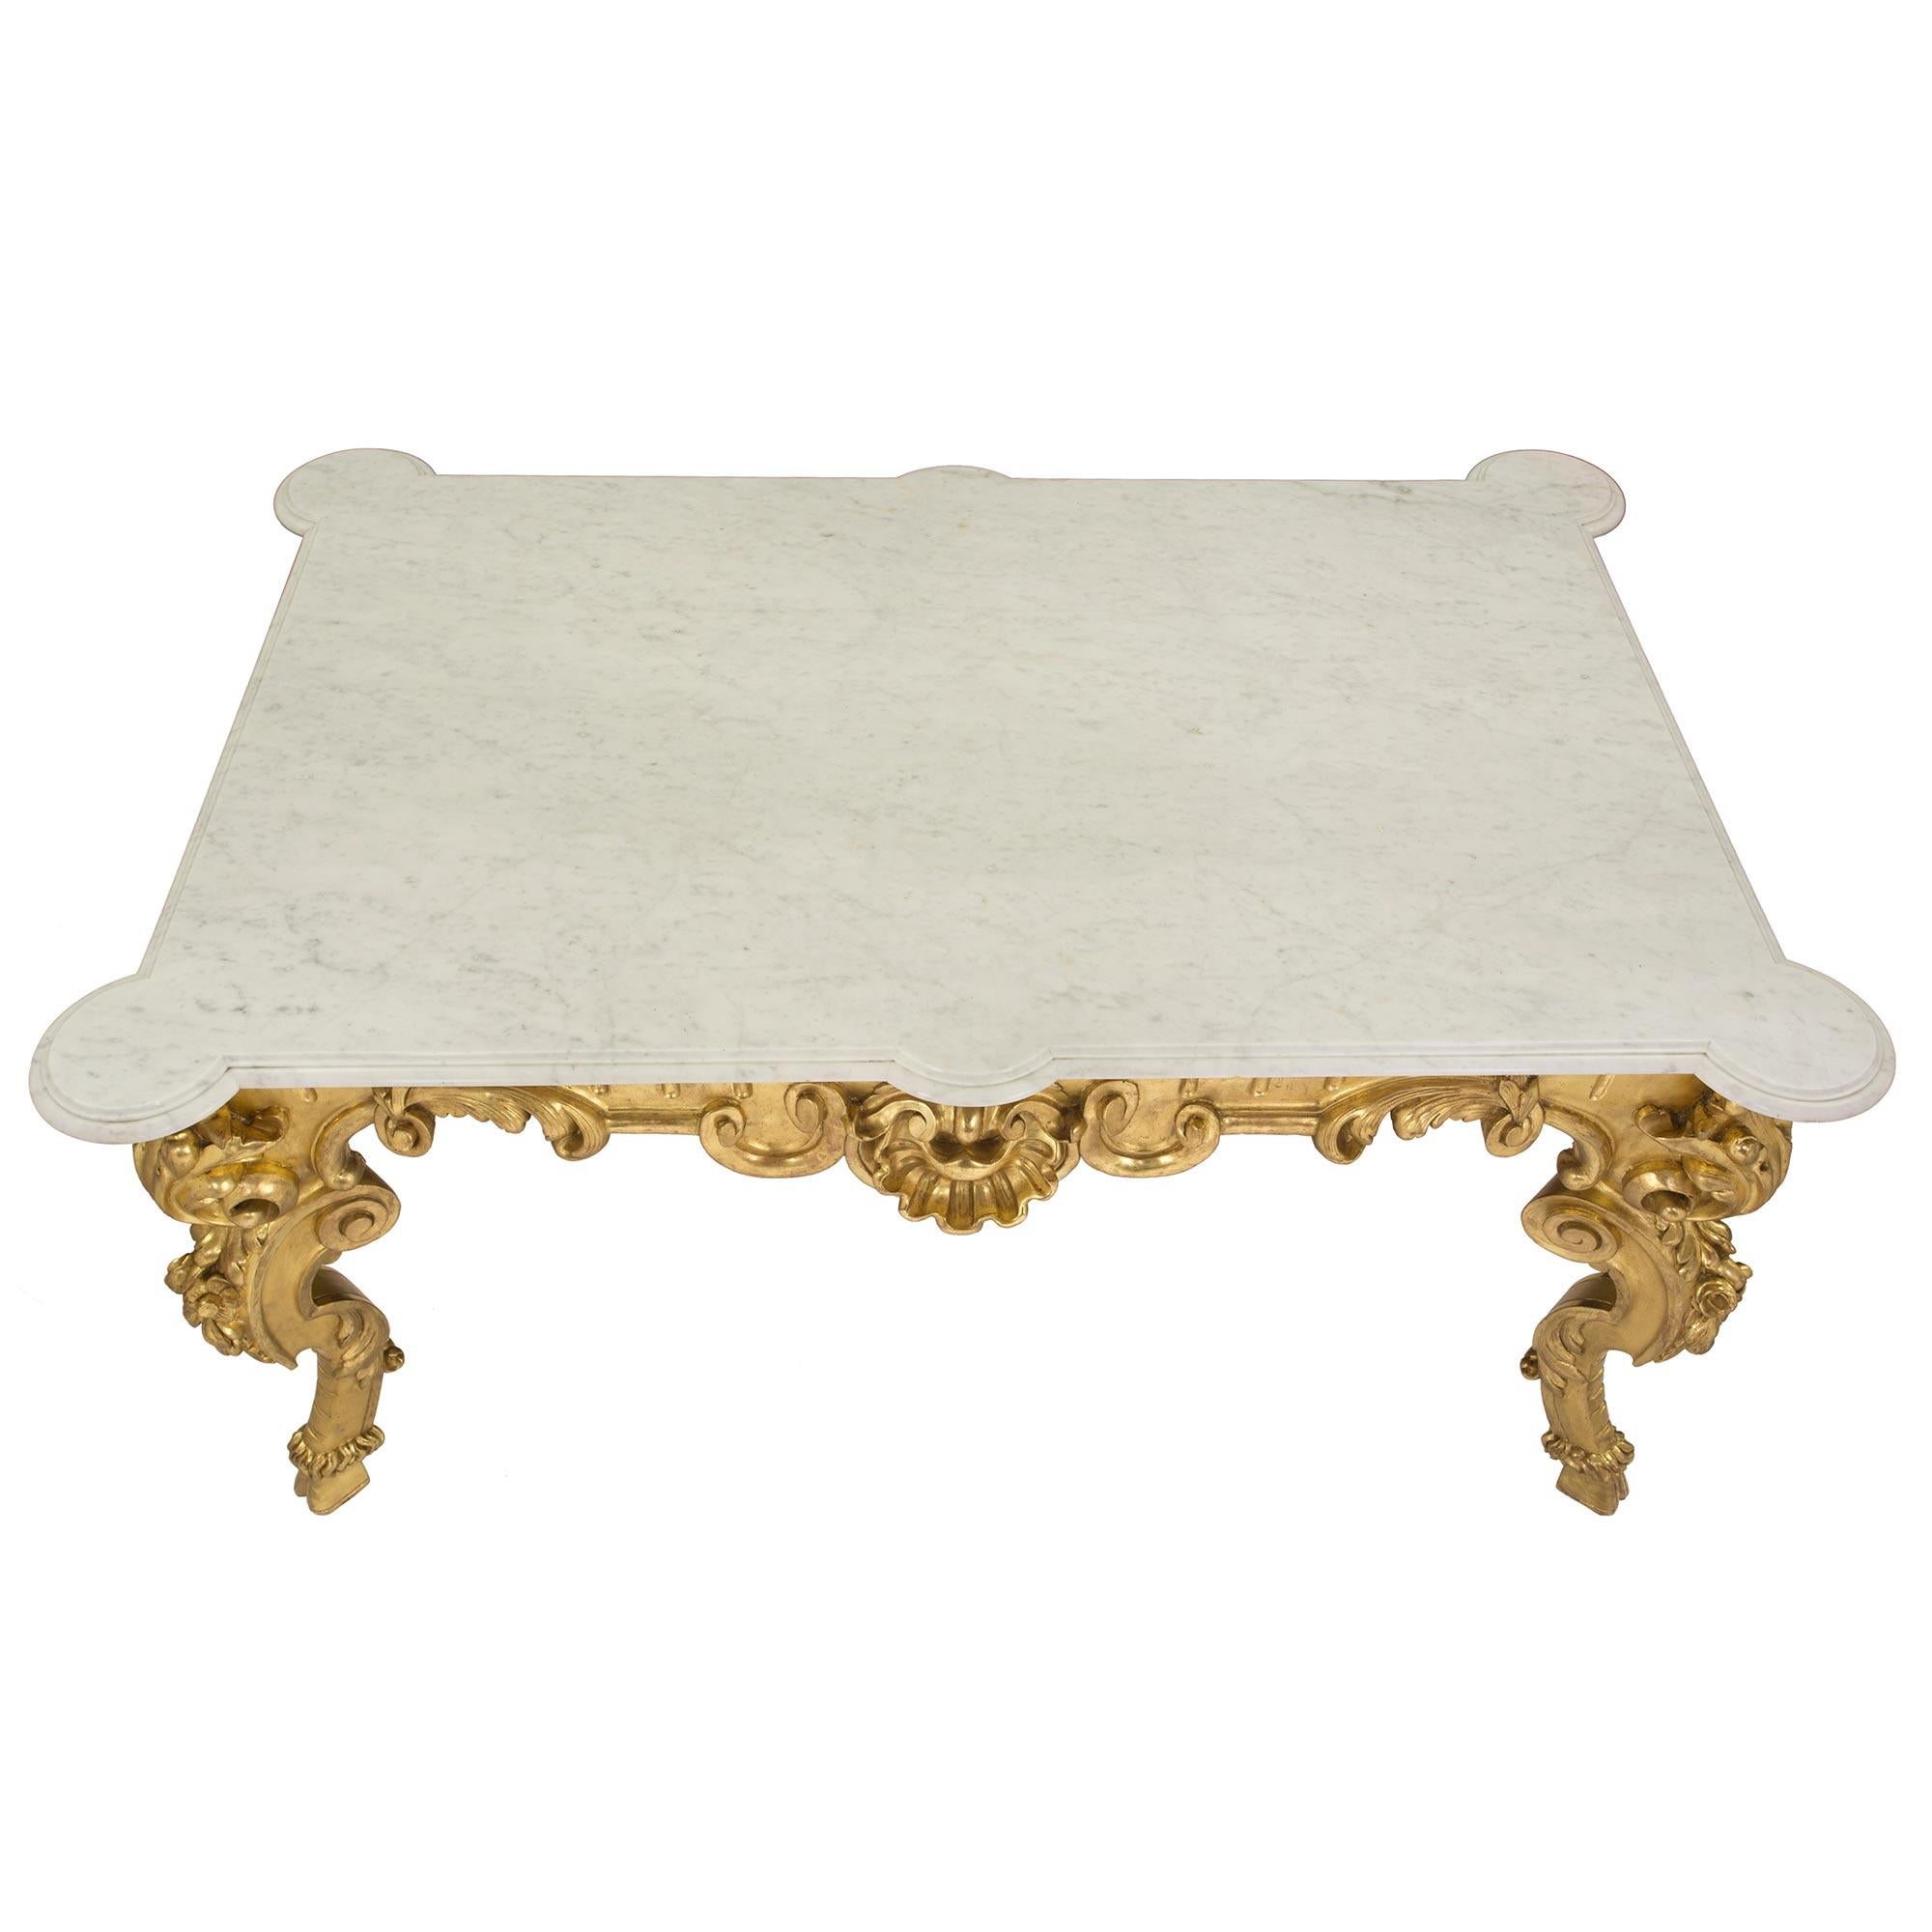 A most important and large scale Italian early 19th century Louis XV st. giltwood center table. The rectangular shaped table is raised by four 'S' scrolled legs with most impressive and richly carved acanthus leaves over bold flowers and ending with